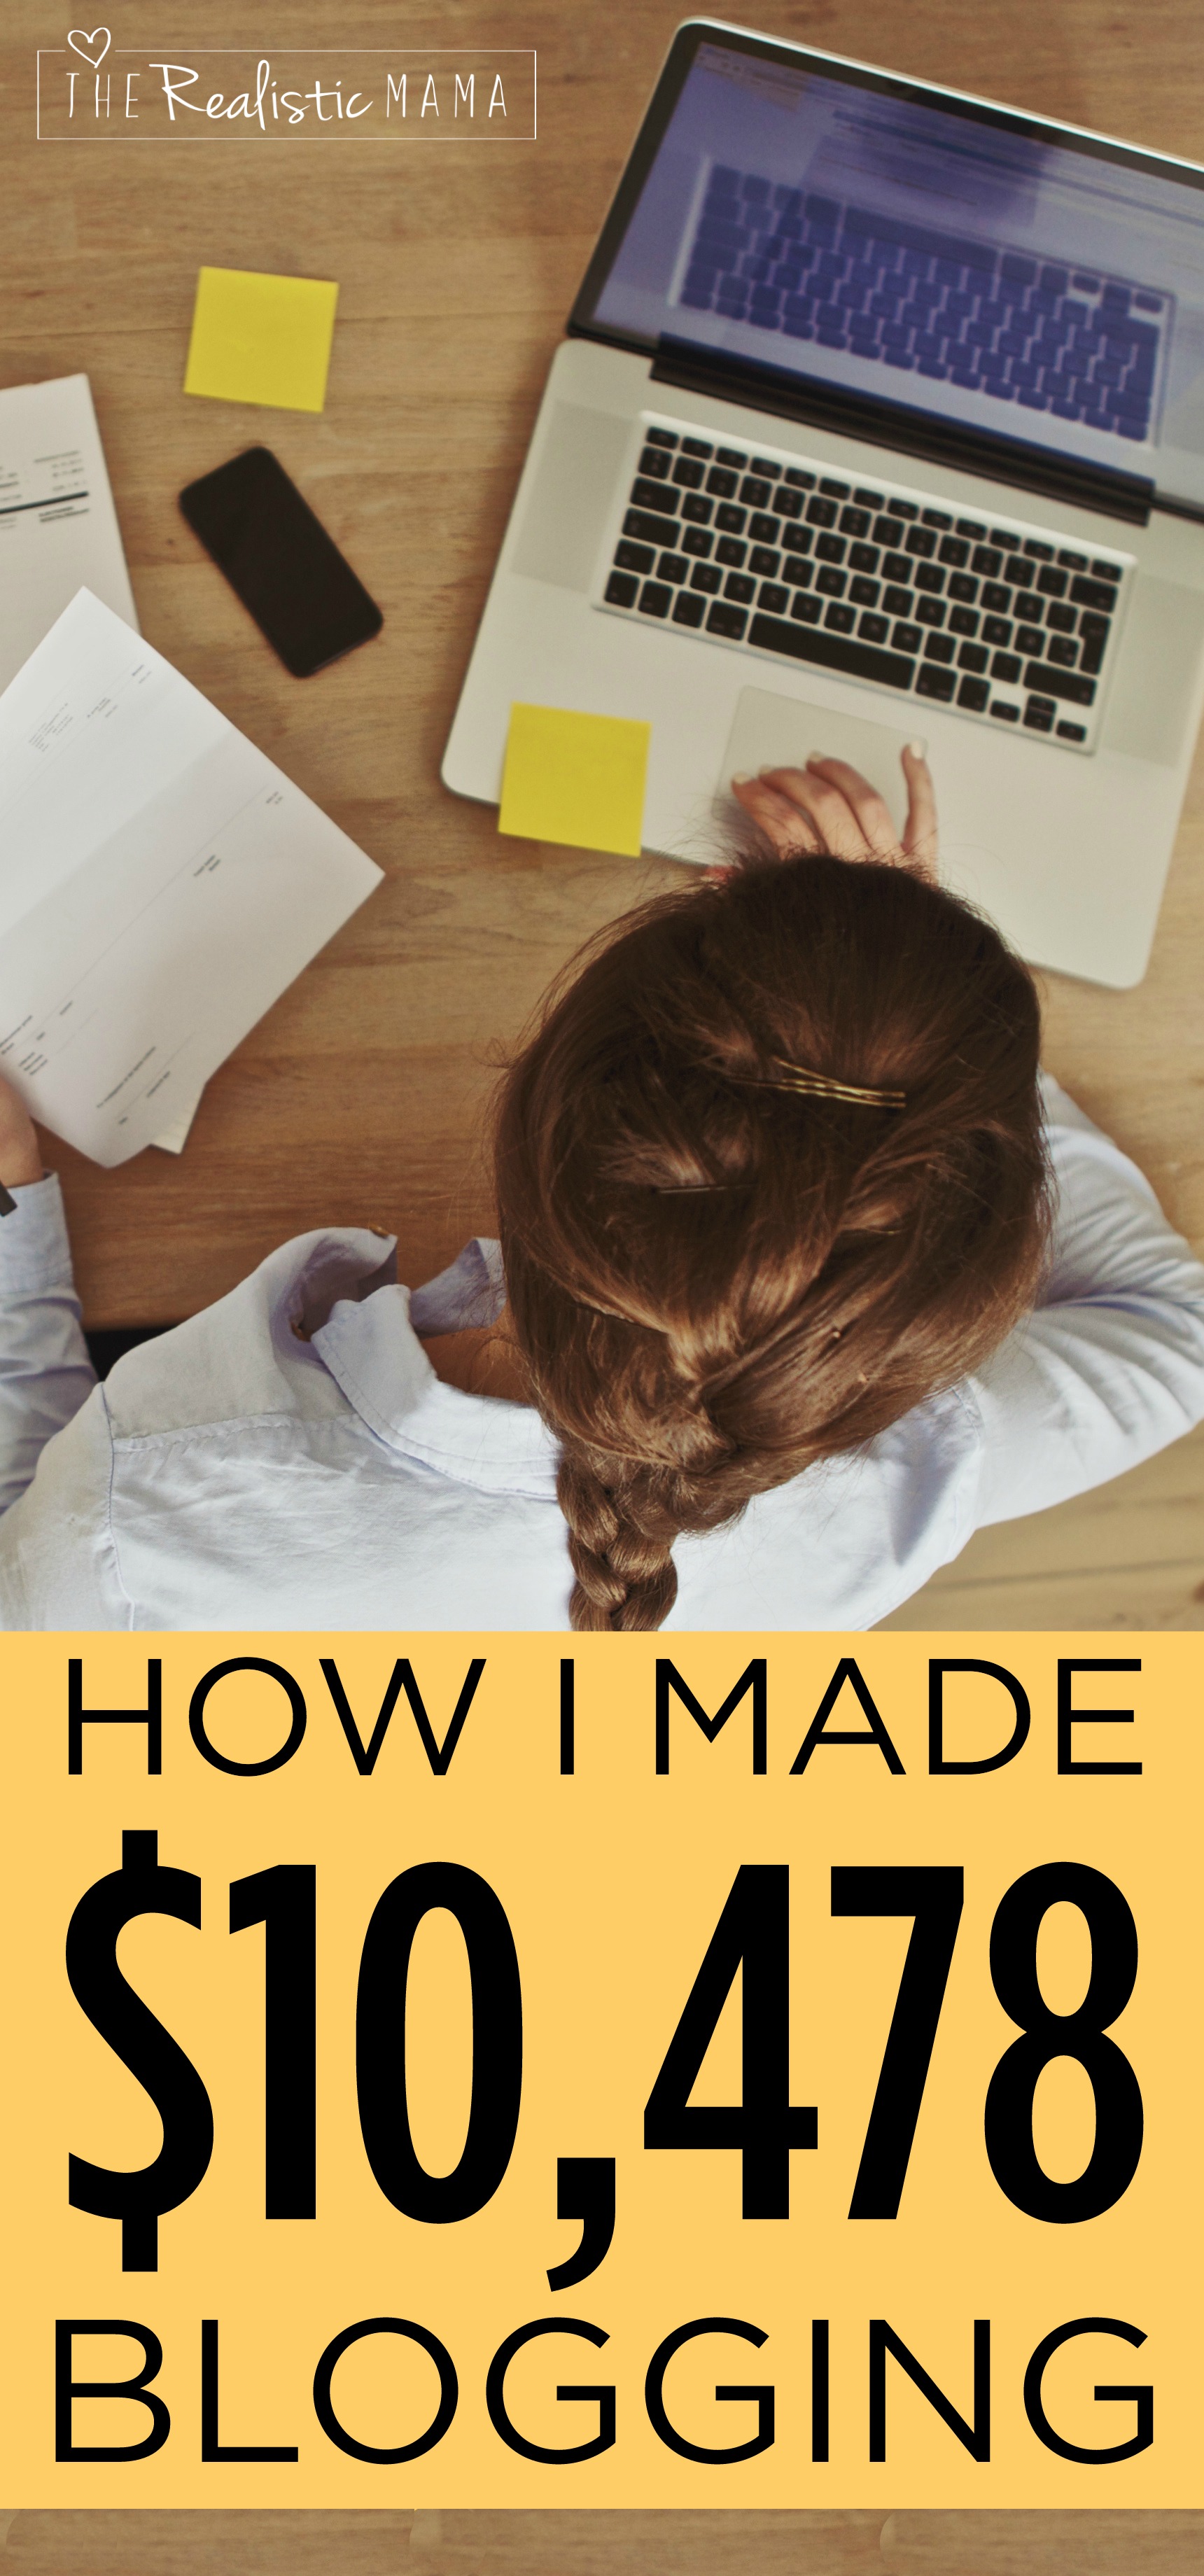 How I made $10,478 blogging in July and how to start your own blog.